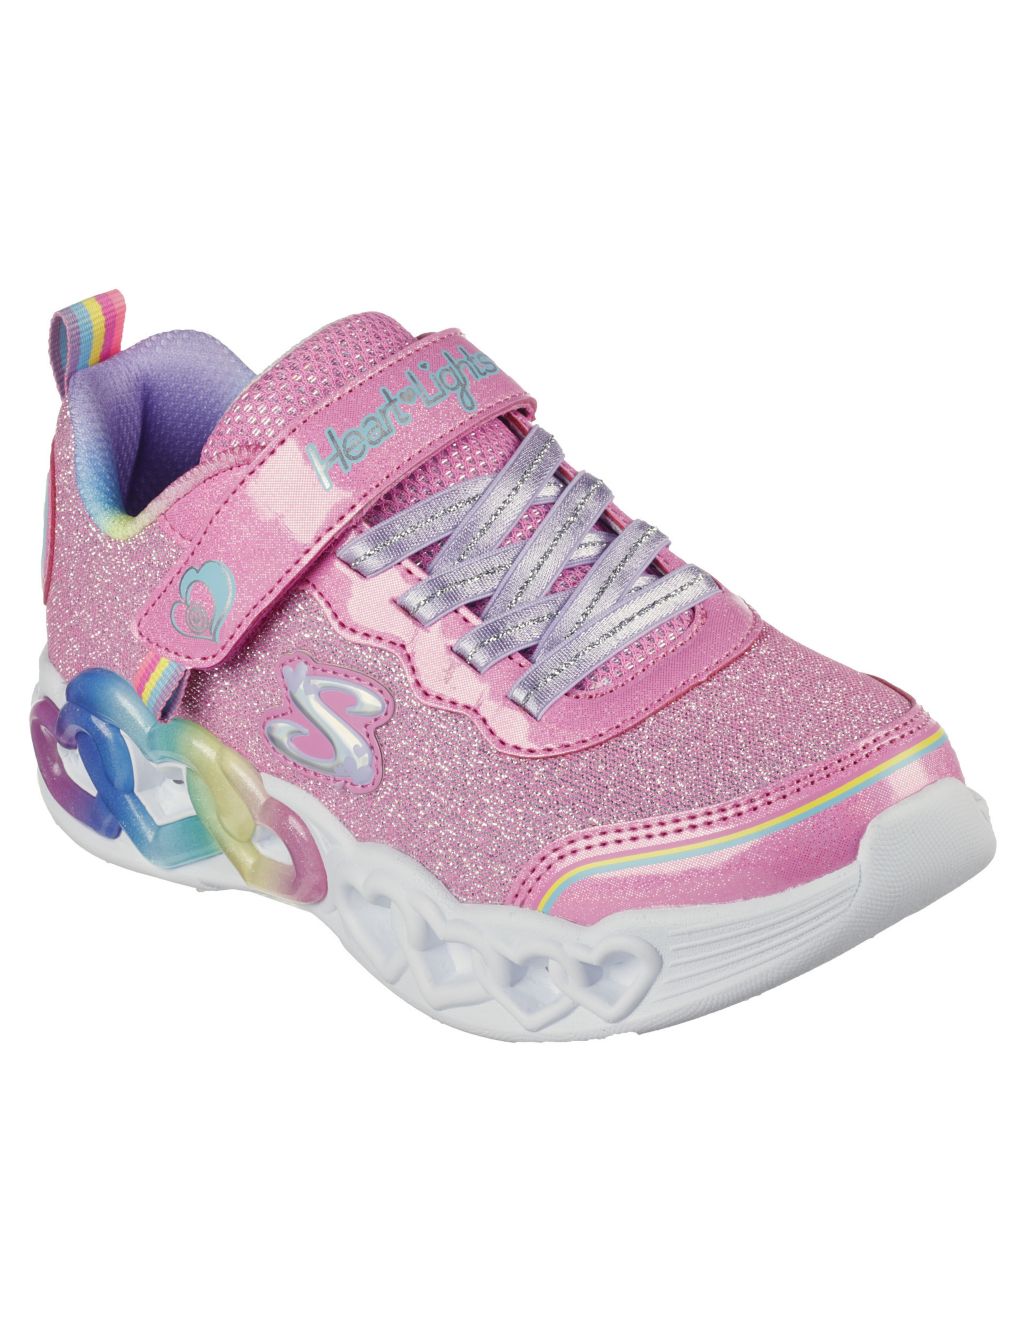 Infinite Heart Lights Love Prism Trainers (9.5 Small - 3 Large) image 3